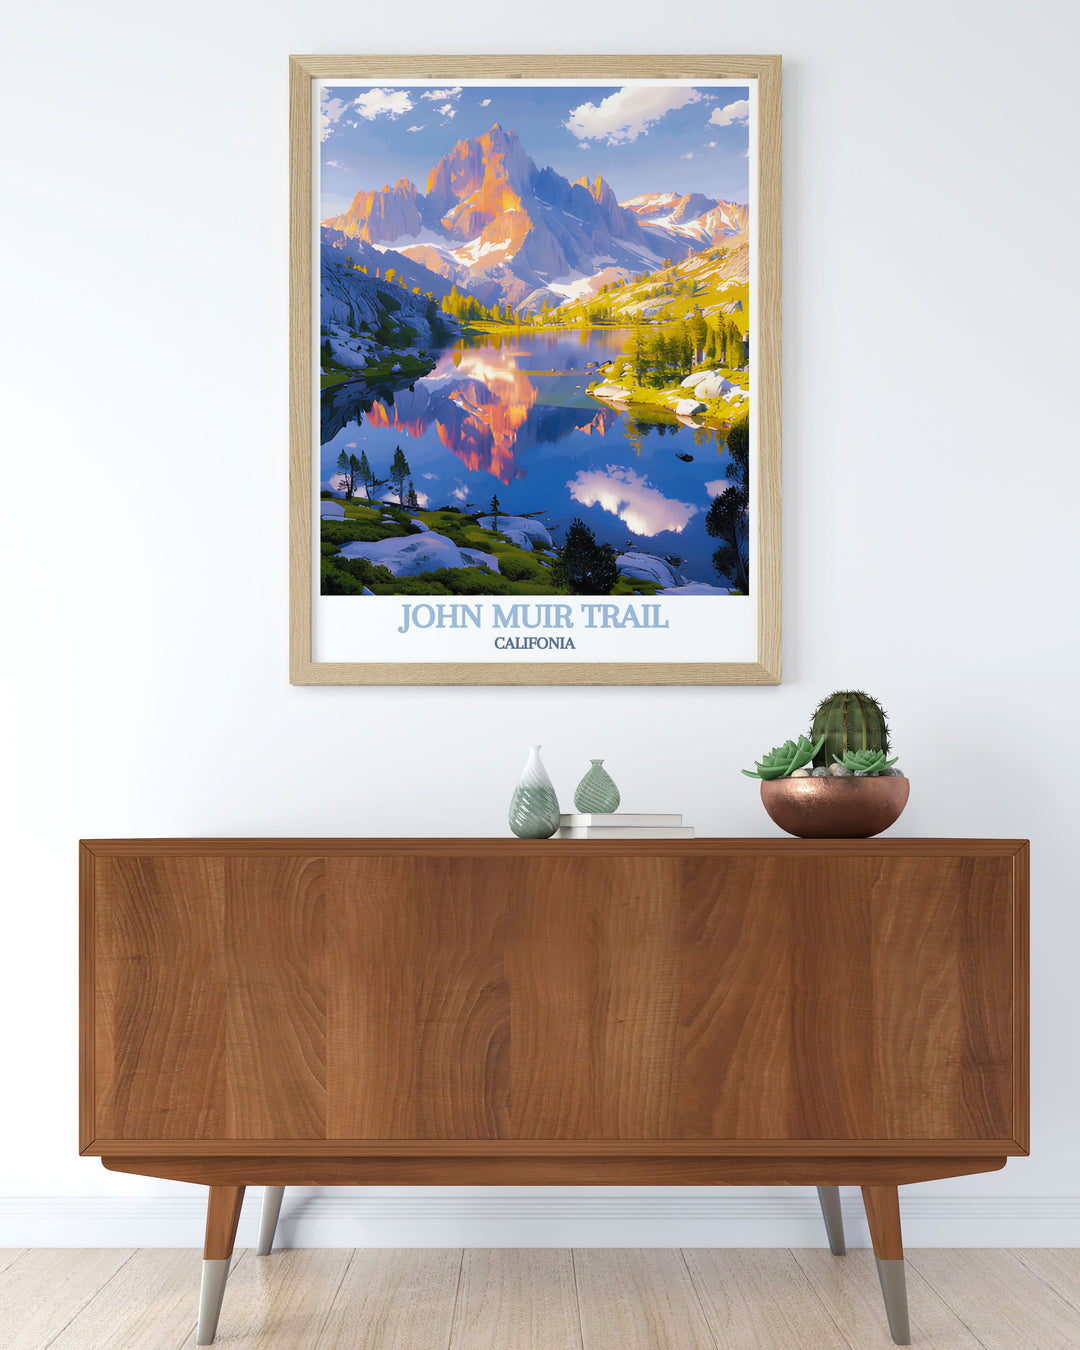 Showcasing Californias rich natural heritage, this poster depicts iconic landscapes and diverse ecosystems. Perfect for nature enthusiasts and travelers, this artwork offers a glimpse into the majestic beauty of California.